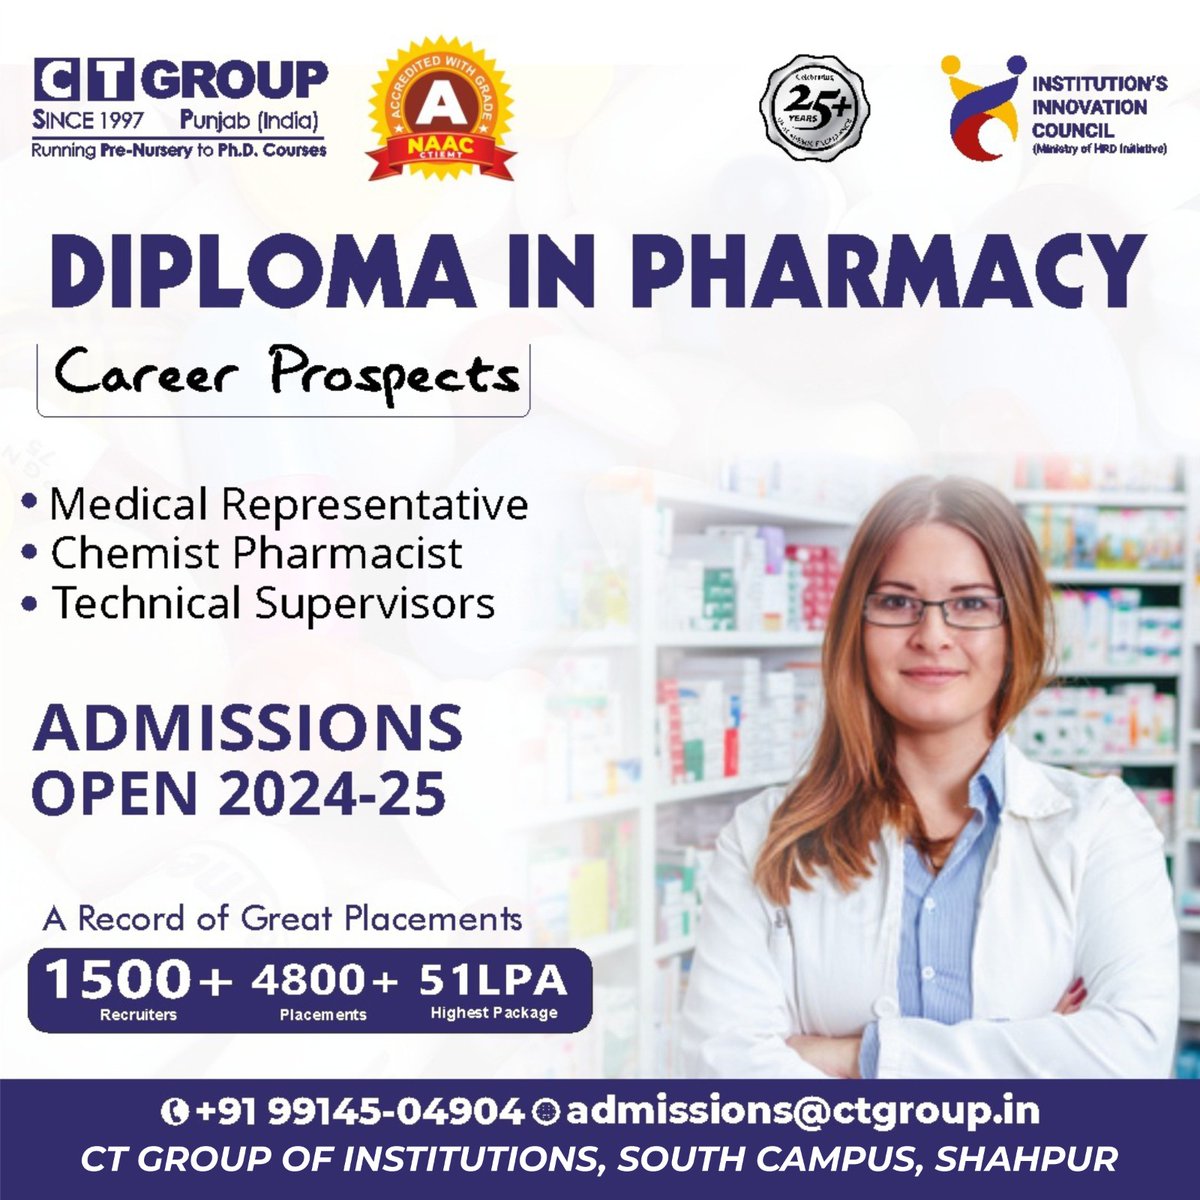 🚀 Transform your future with a Diploma in Pharmacy at CT Group of Institutions, South Campus, Shahpur! Discover limitless career possibilities as a Medical Representative, Chemist Pharmacist, or Technical Supervisor. Seize this opportunity – admissions for 2024-25 are now open!